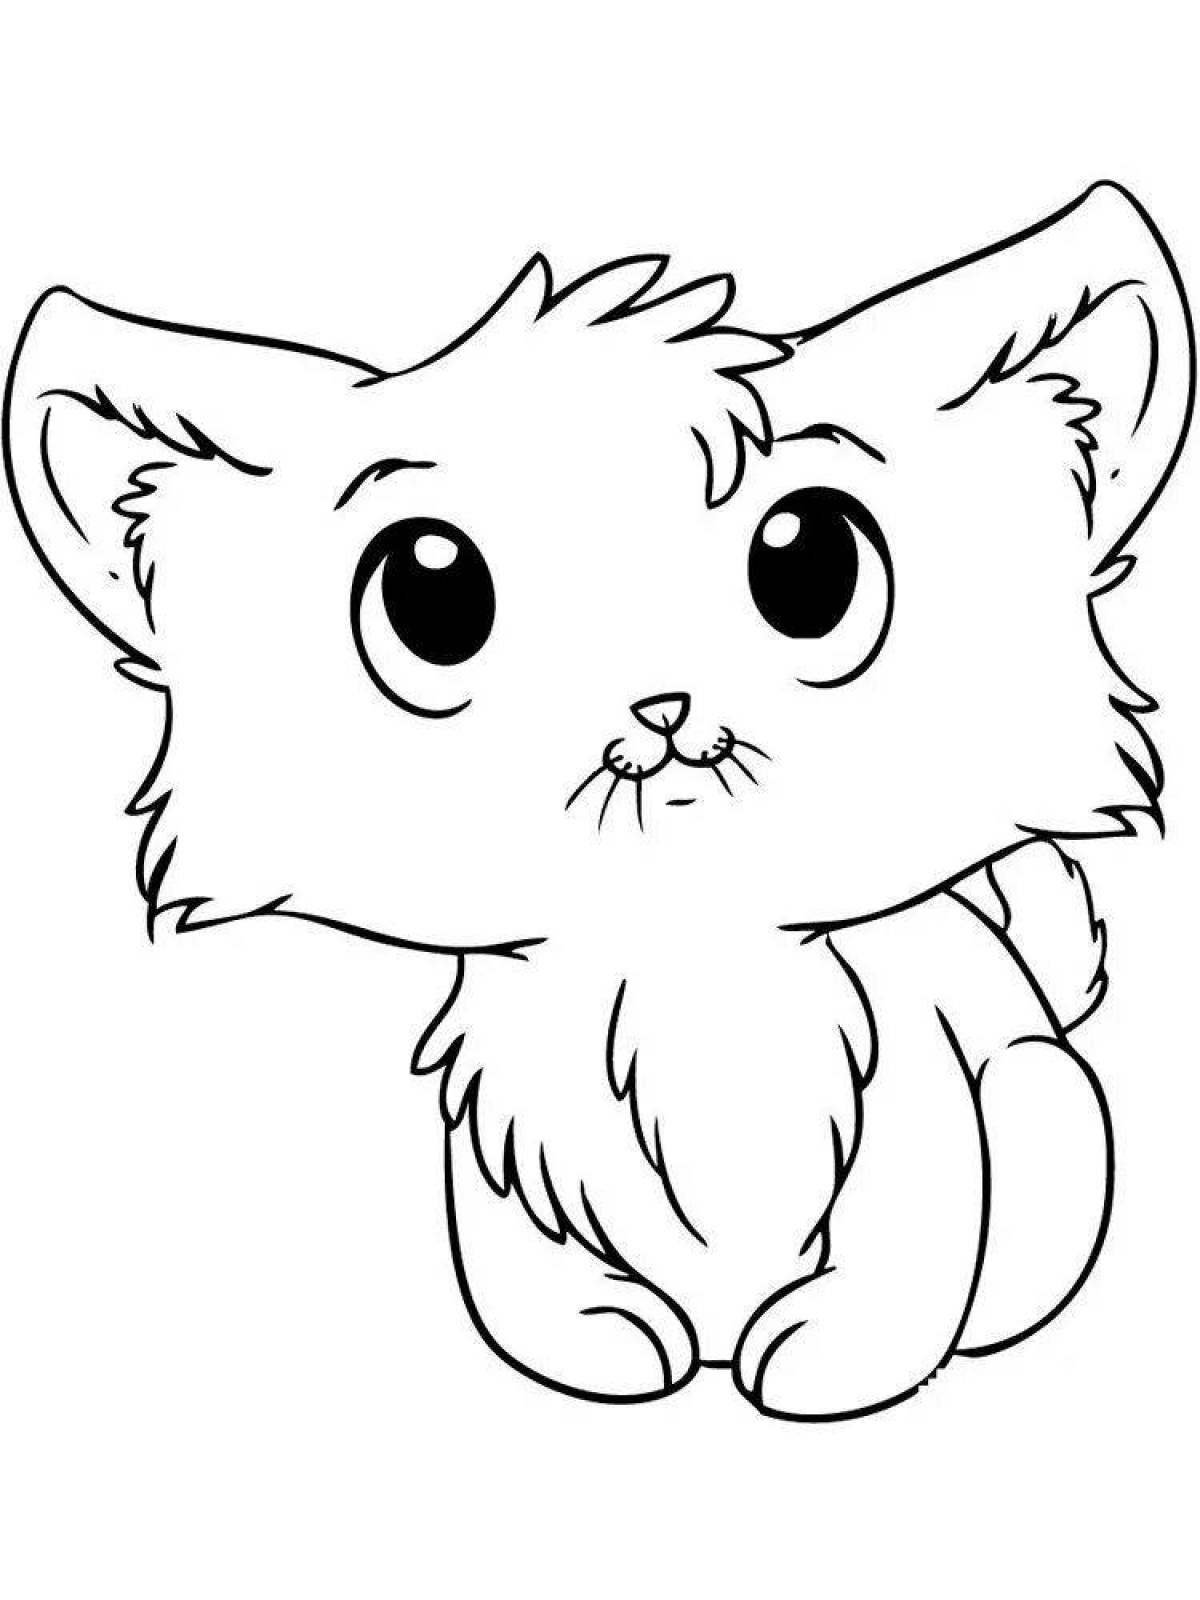 Snuggly coloring page cute kittens